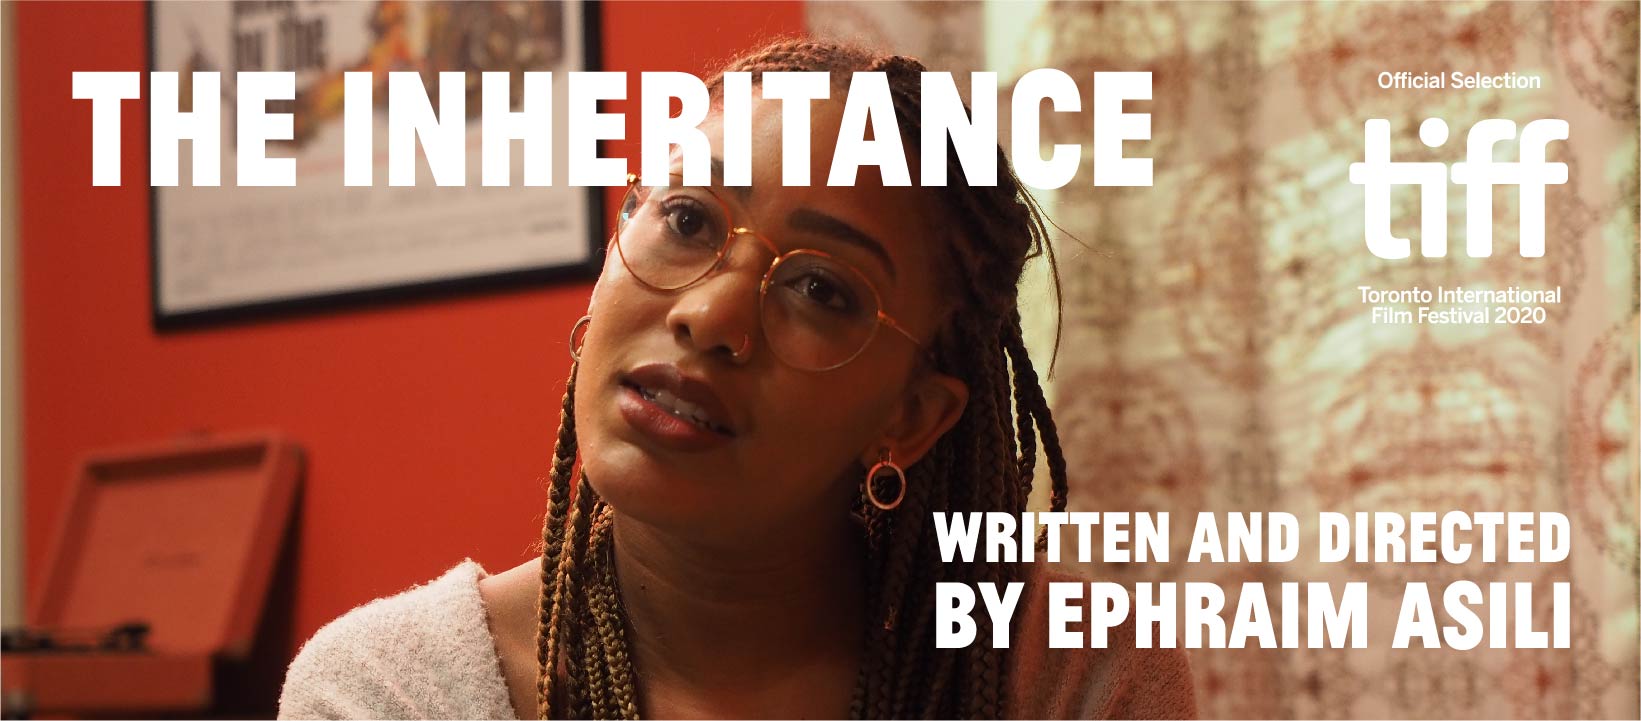 A Black woman with glasses listening to someone in a red room with African imagery on the walls, The Inheritance Written and Directed by Ephraim Asili. 